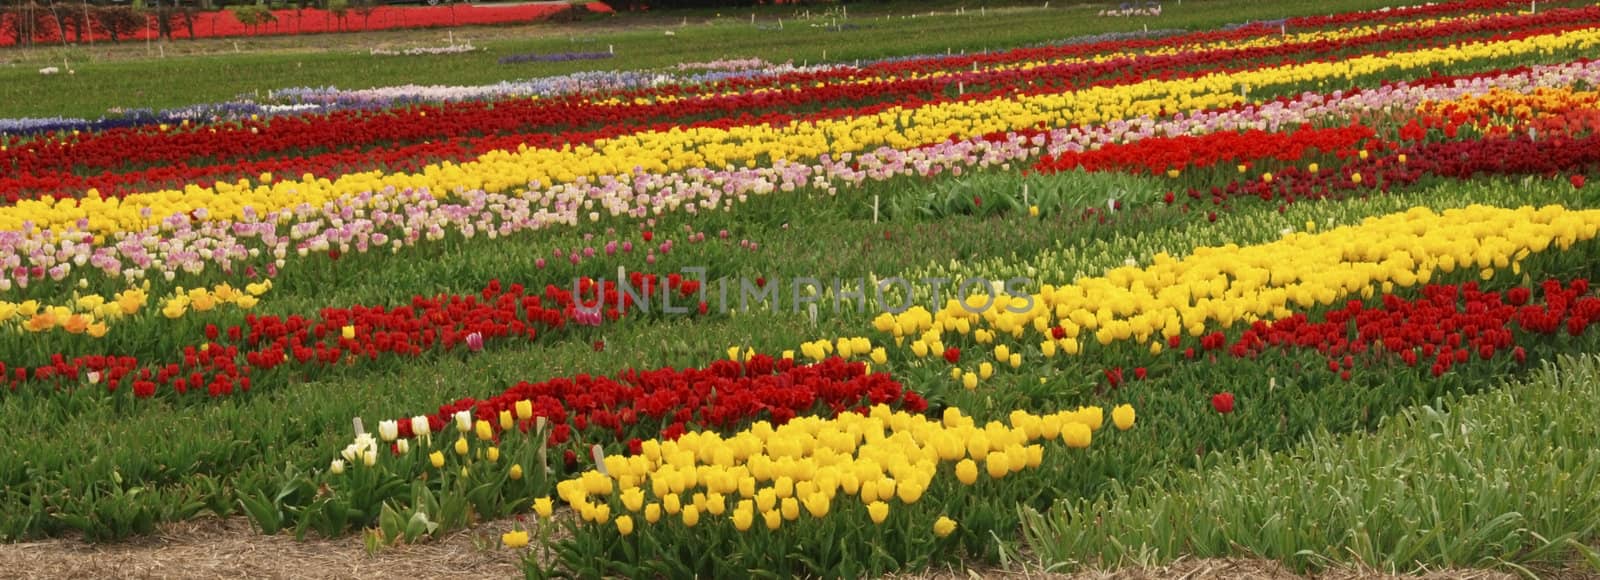 Red and yellow tulip fields in Holland in the spring